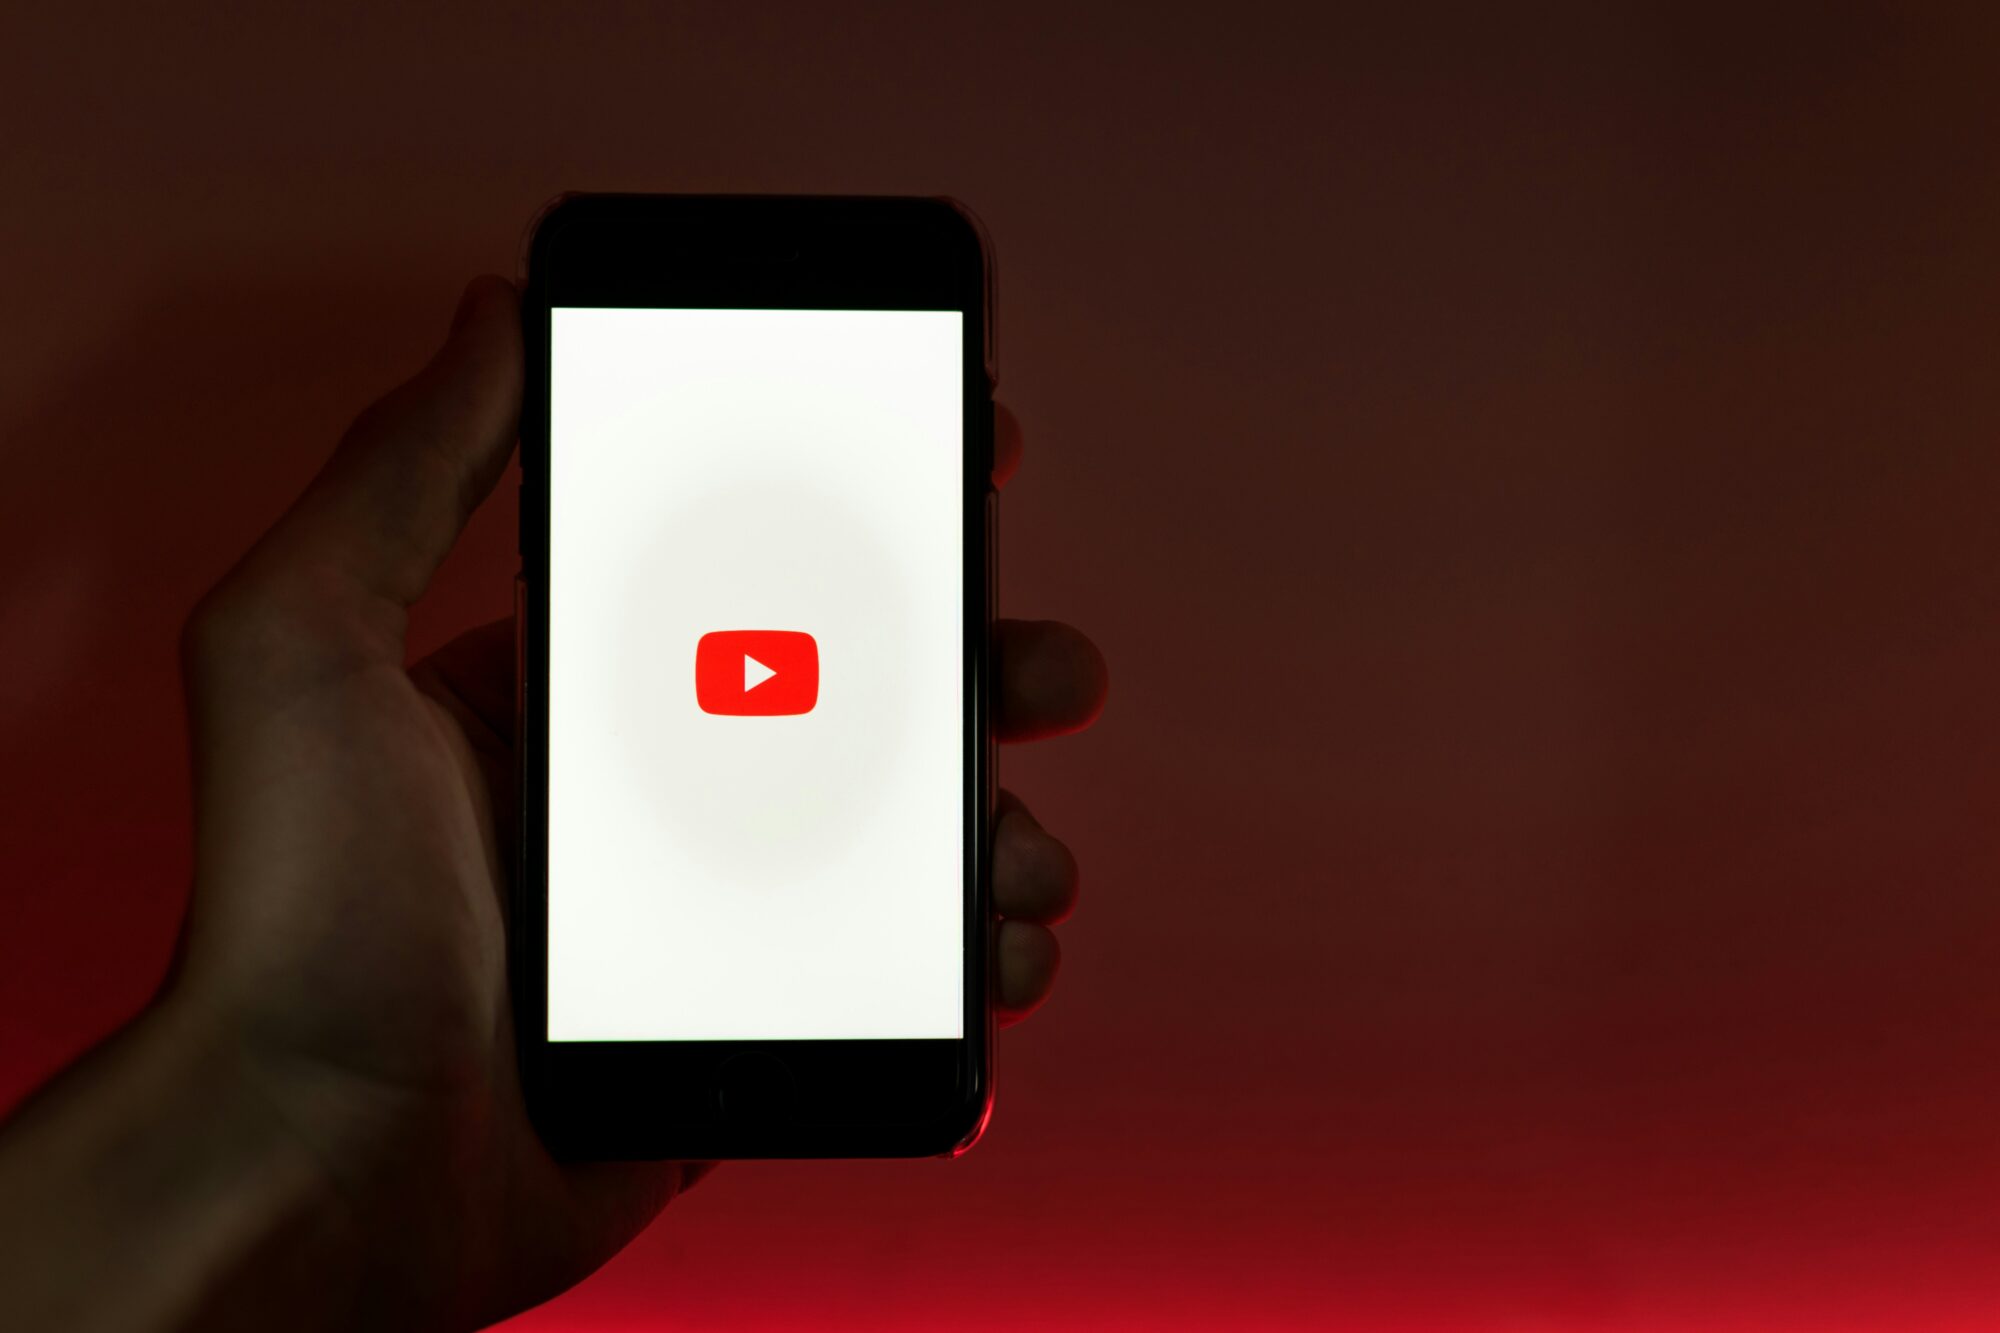 YouTube's investments into YouTube Shorts and social shopping will finally payoff after the TikTok ban